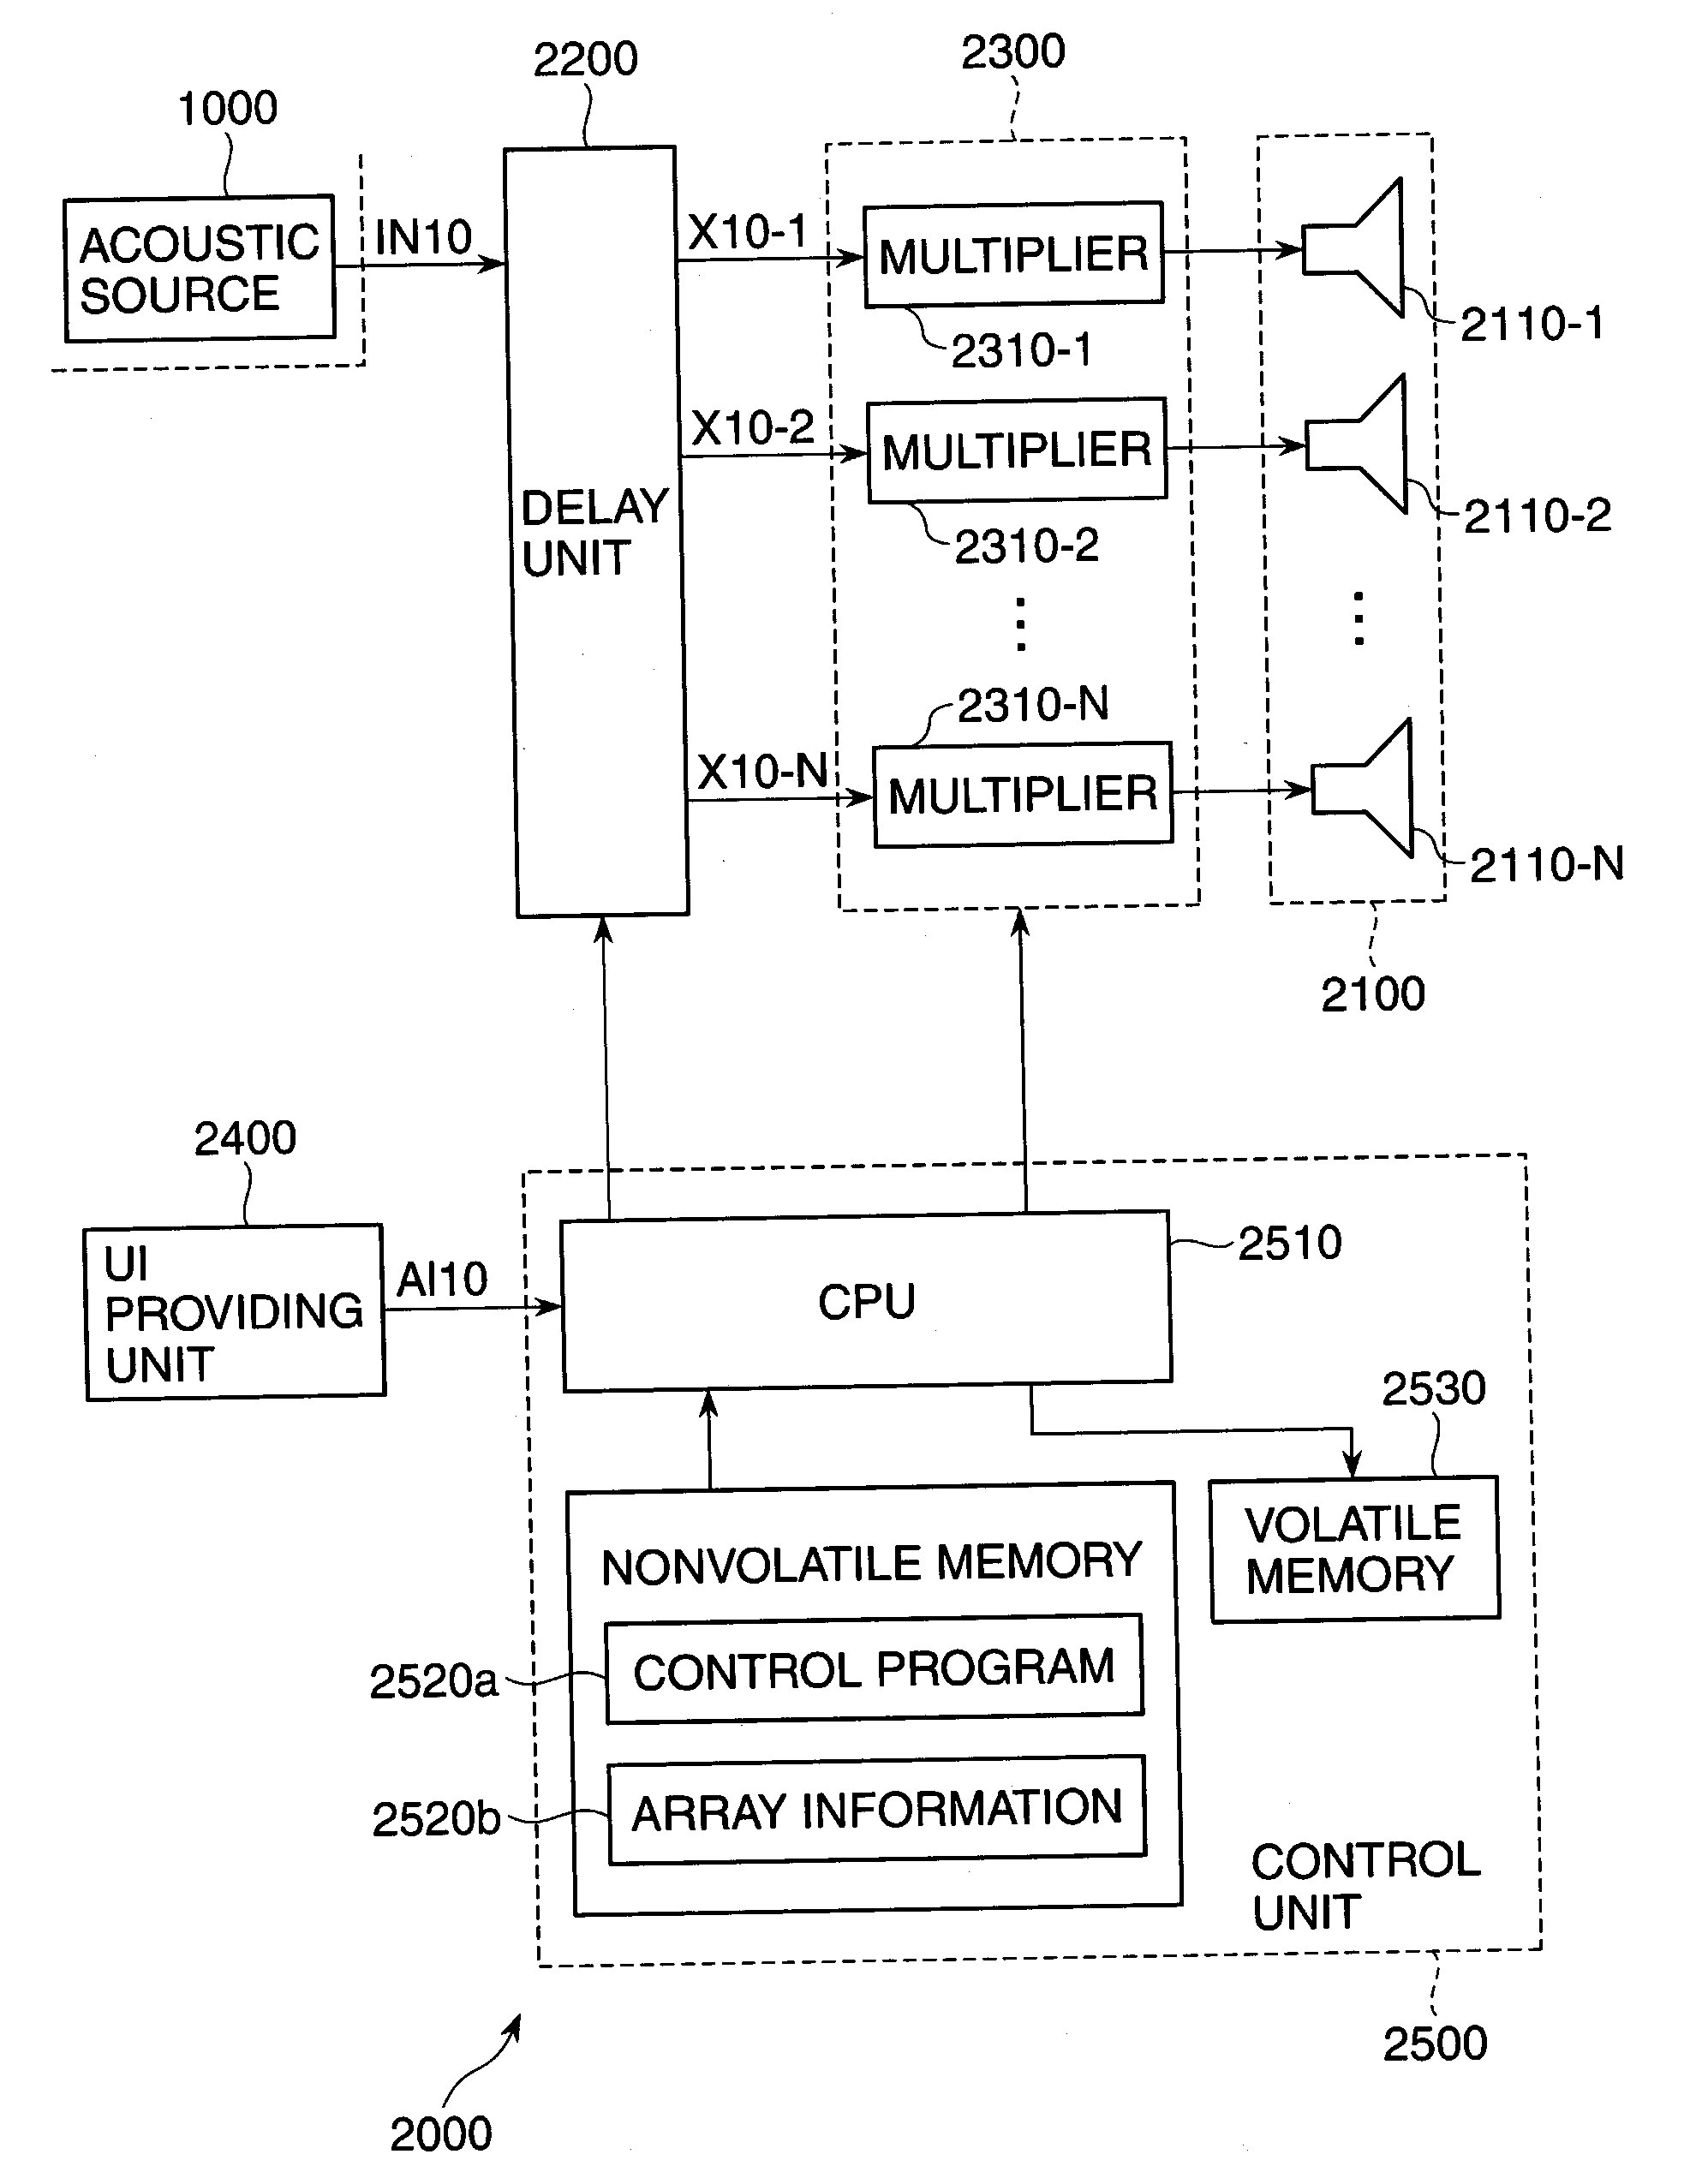 Delay time calculation apparatus and method